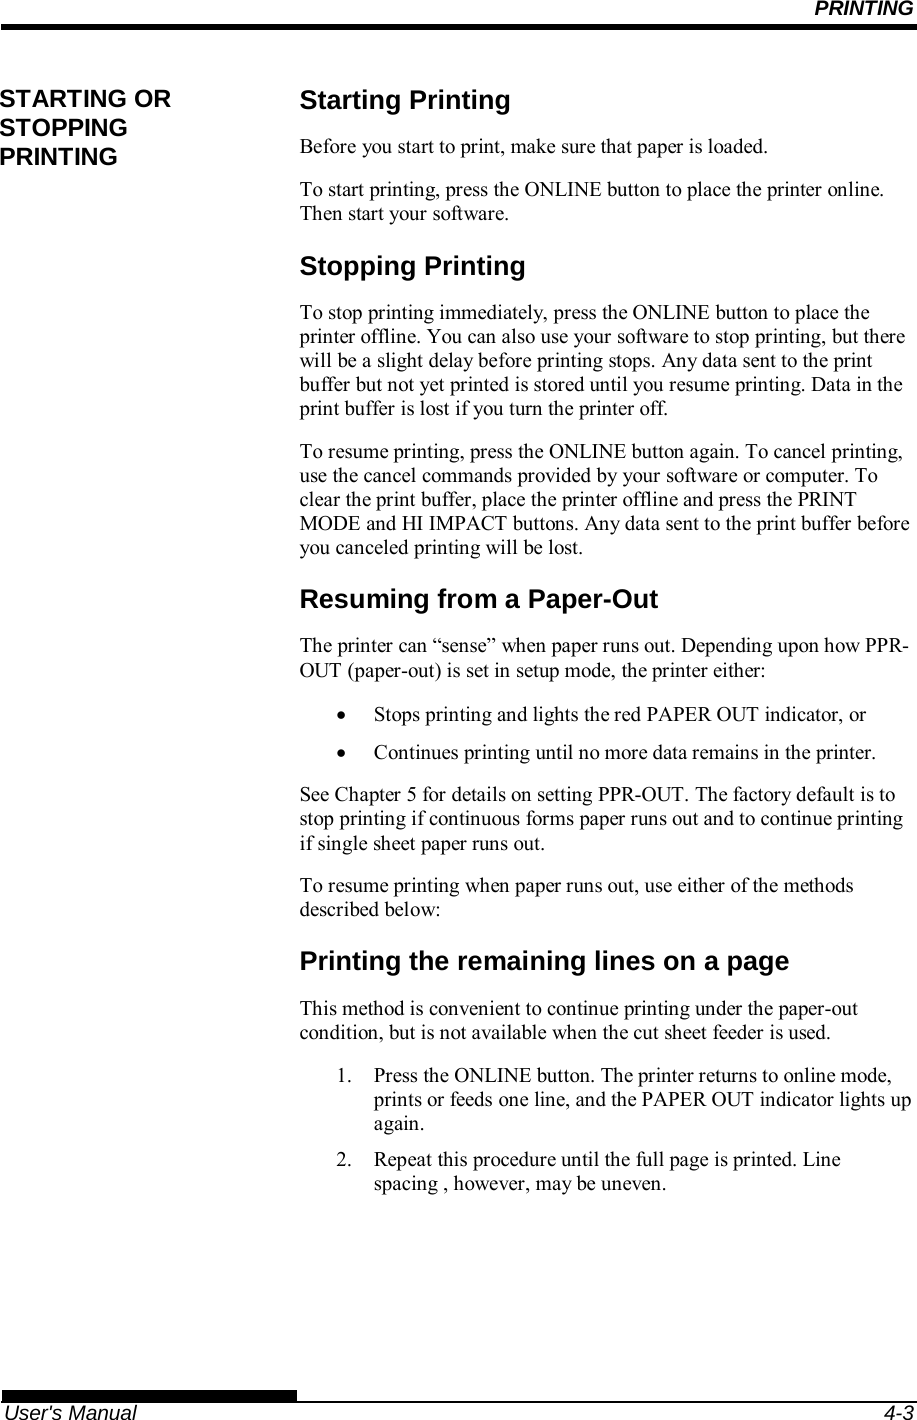 PRINTING   User&apos;s Manual  4-3 Starting Printing Before you start to print, make sure that paper is loaded. To start printing, press the ONLINE button to place the printer online. Then start your software. Stopping Printing To stop printing immediately, press the ONLINE button to place the printer offline. You can also use your software to stop printing, but there will be a slight delay before printing stops. Any data sent to the print buffer but not yet printed is stored until you resume printing. Data in the print buffer is lost if you turn the printer off. To resume printing, press the ONLINE button again. To cancel printing, use the cancel commands provided by your software or computer. To clear the print buffer, place the printer offline and press the PRINT MODE and HI IMPACT buttons. Any data sent to the print buffer before you canceled printing will be lost. Resuming from a Paper-Out The printer can “sense” when paper runs out. Depending upon how PPR-OUT (paper-out) is set in setup mode, the printer either:   Stops printing and lights the red PAPER OUT indicator, or   Continues printing until no more data remains in the printer. See Chapter 5 for details on setting PPR-OUT. The factory default is to stop printing if continuous forms paper runs out and to continue printing if single sheet paper runs out. To resume printing when paper runs out, use either of the methods described below: Printing the remaining lines on a page This method is convenient to continue printing under the paper-out condition, but is not available when the cut sheet feeder is used. 1.  Press the ONLINE button. The printer returns to online mode, prints or feeds one line, and the PAPER OUT indicator lights up again. 2.  Repeat this procedure until the full page is printed. Line spacing , however, may be uneven. STARTING OR STOPPING PRINTING 